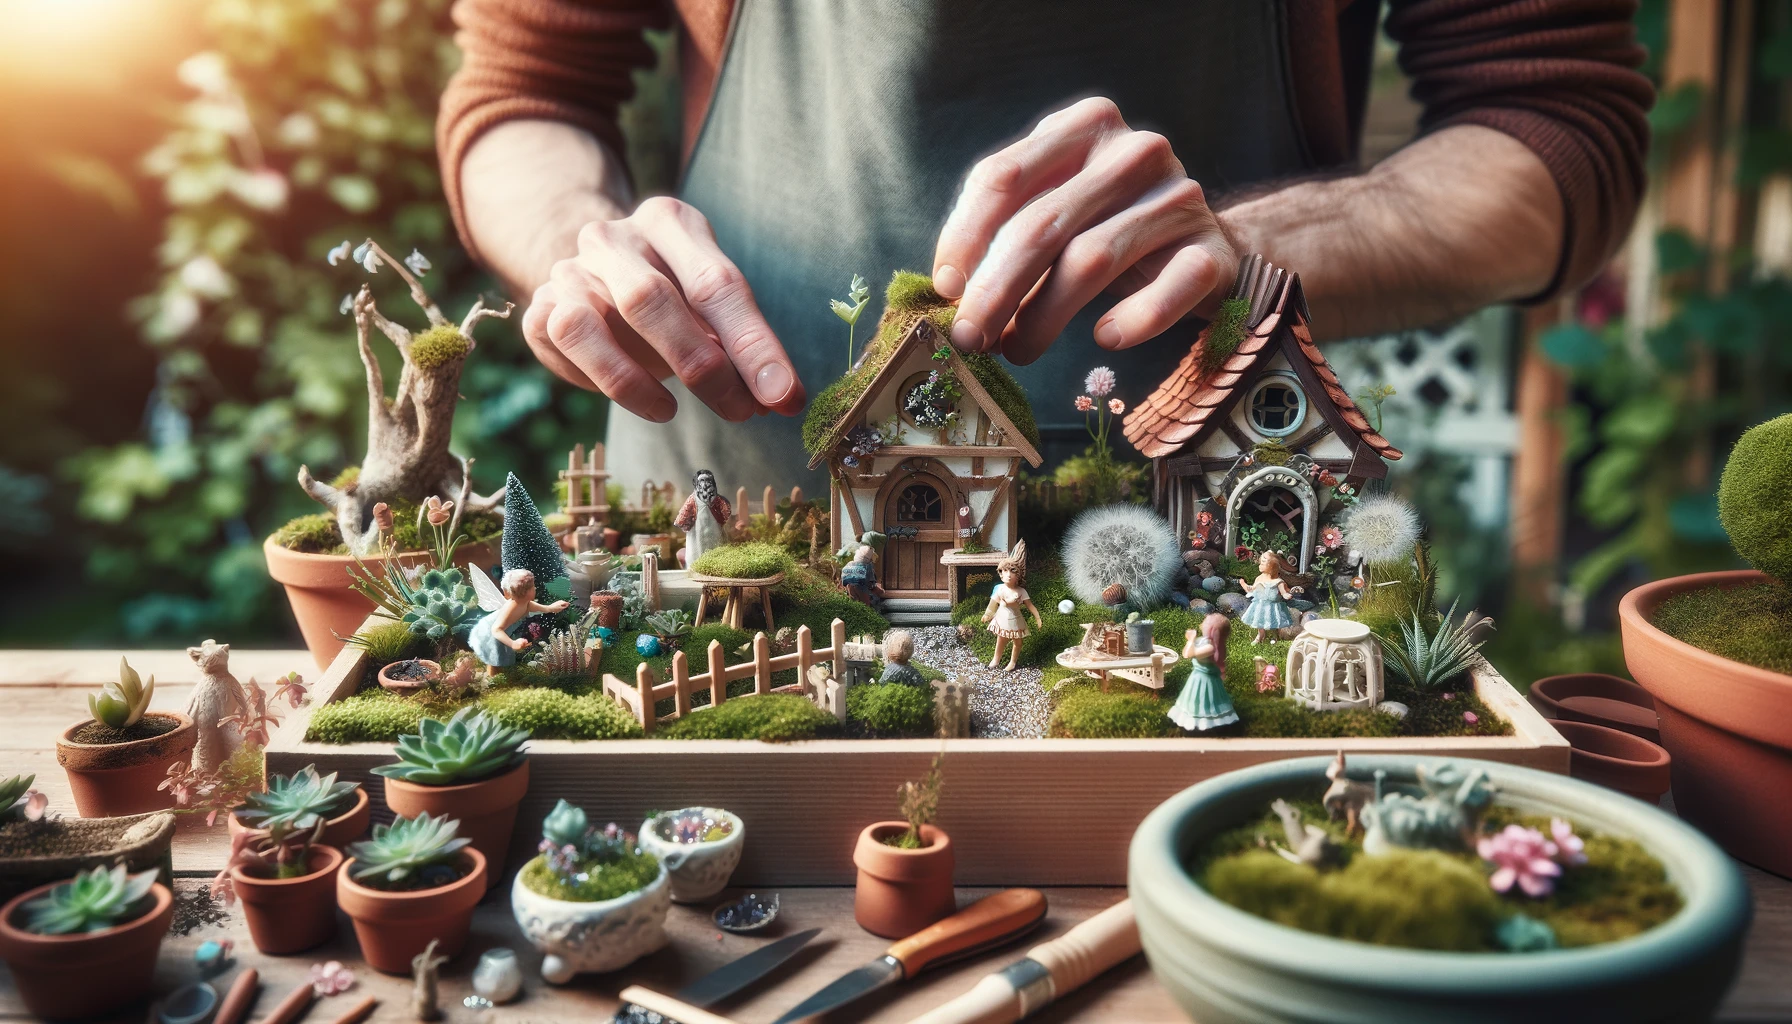 An individual working on creating a fairy garden, arranging miniature houses, furniture, figurines, and small plants